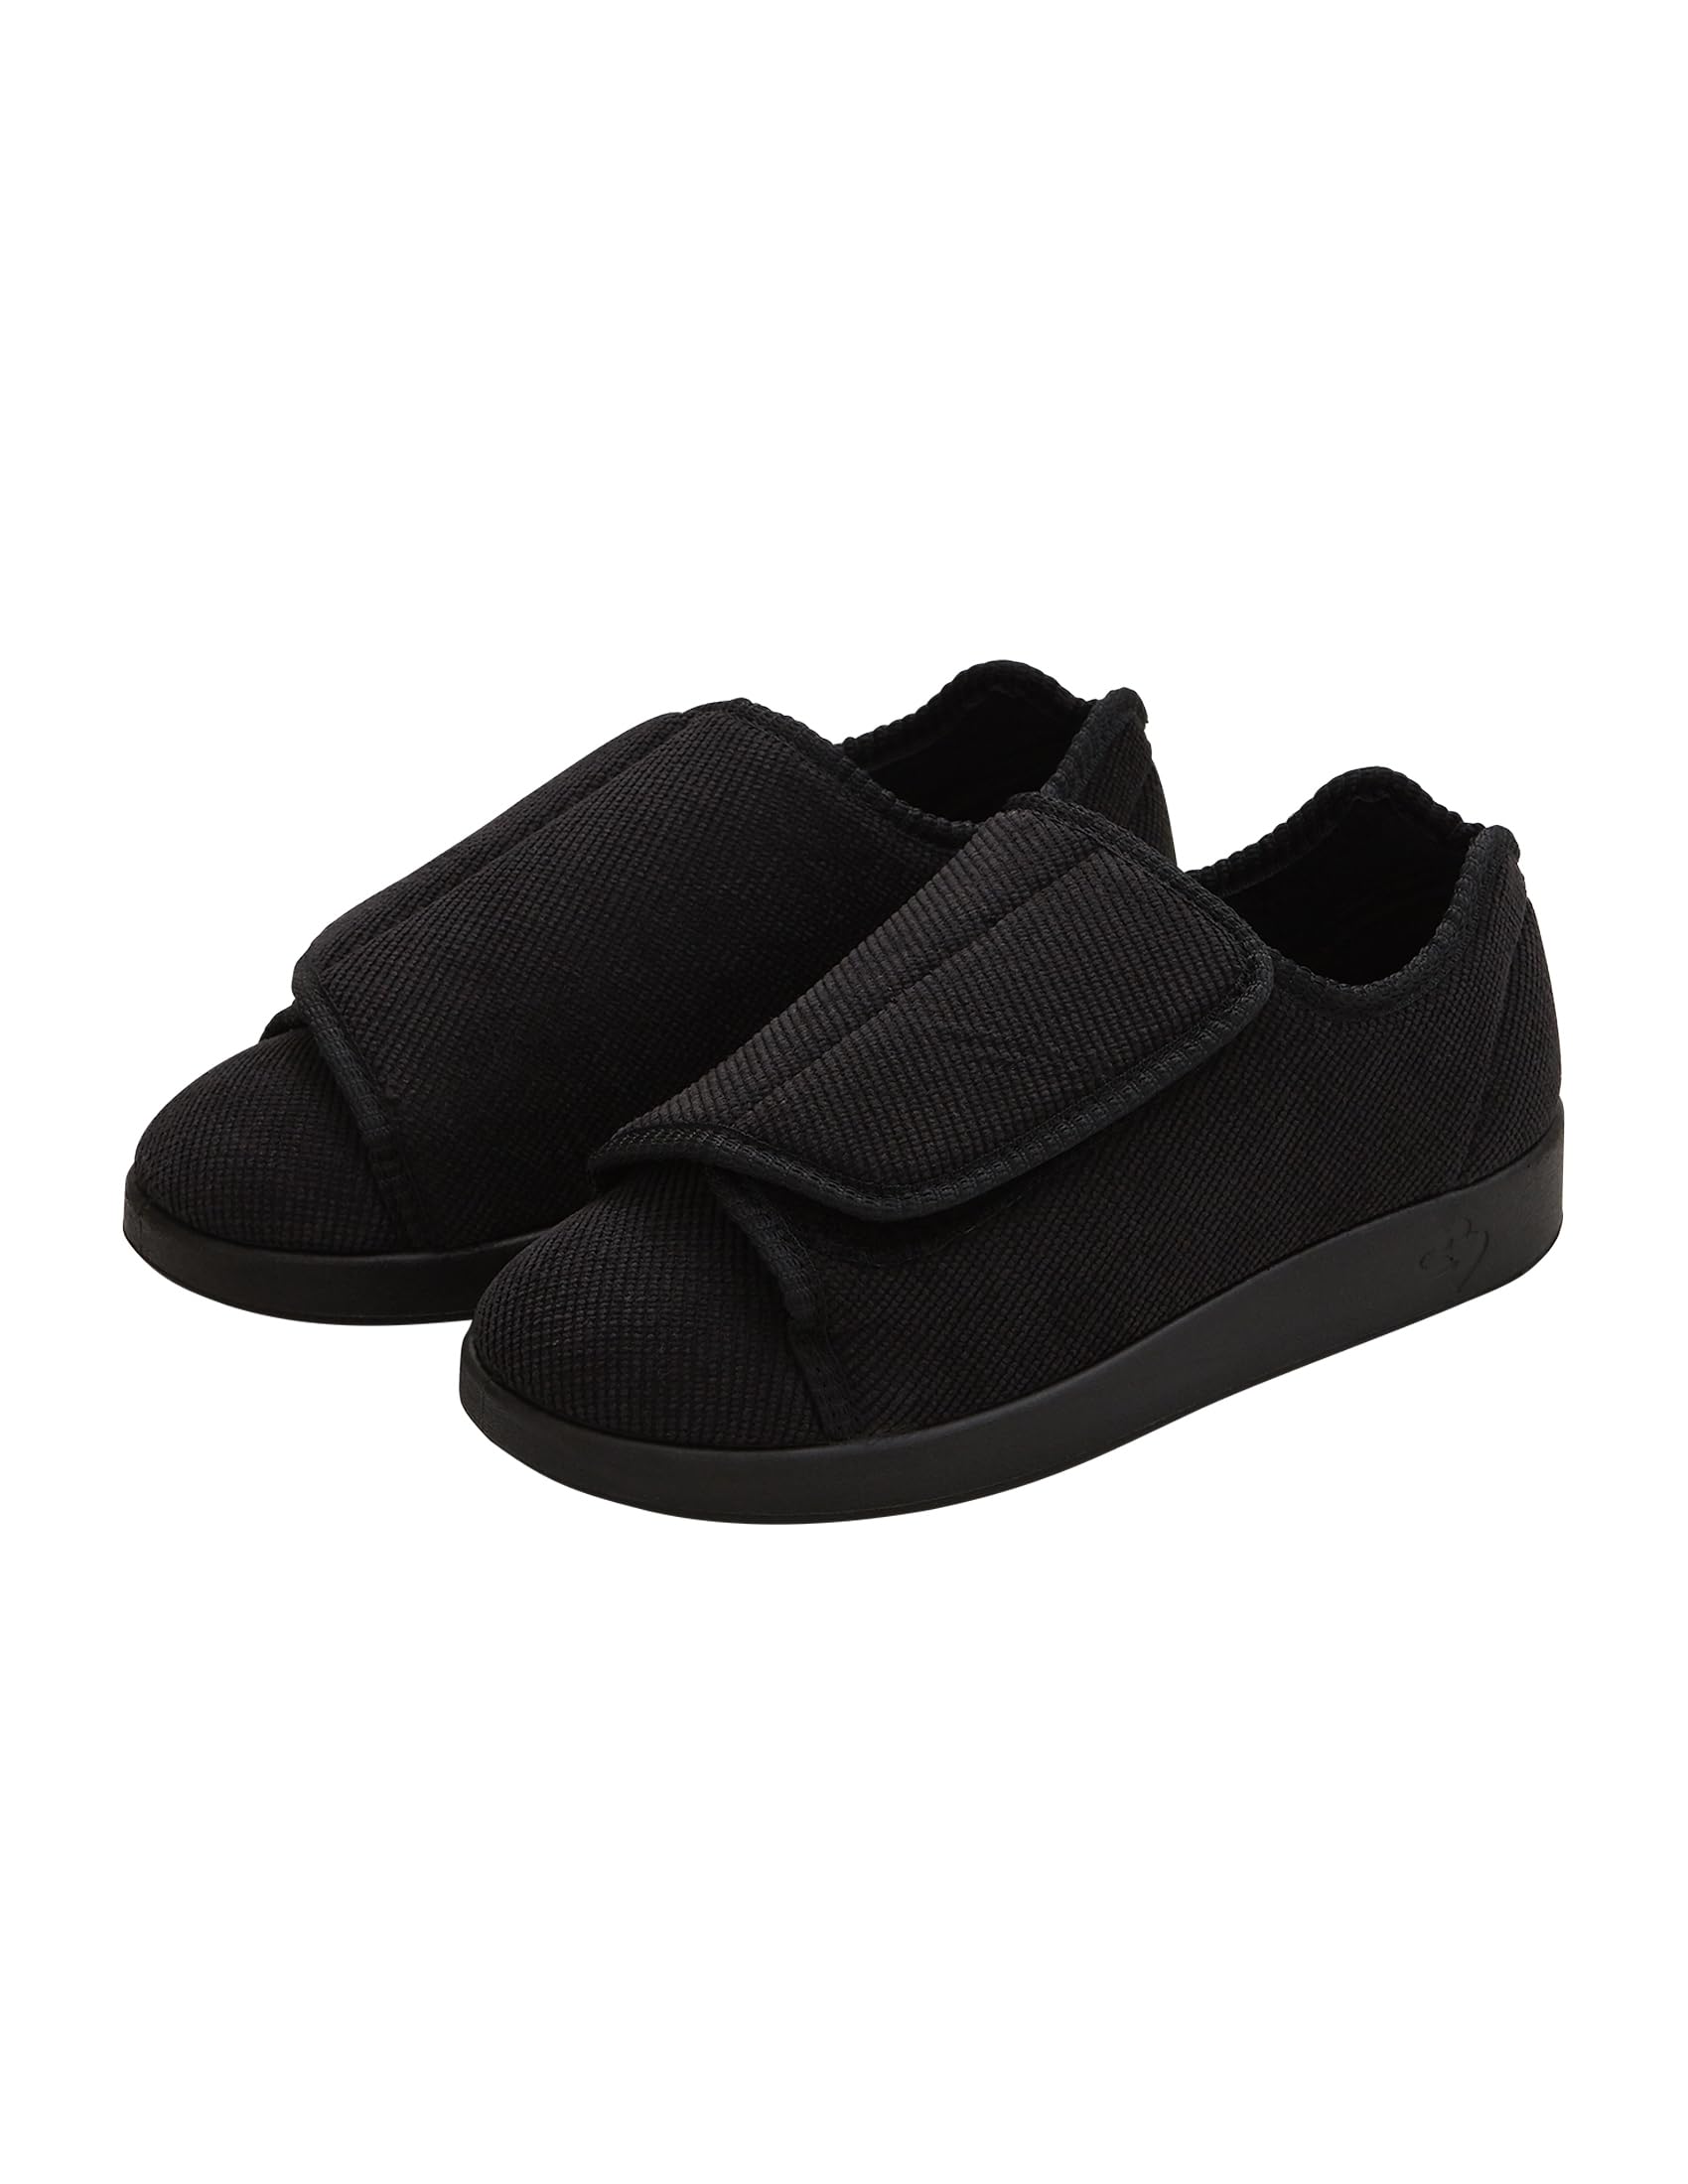 Silvert's Adaptive Clothing & Footwear Women’s Double-Extra Wide Easy Closure Slipper for Seniors - Black/Black 10